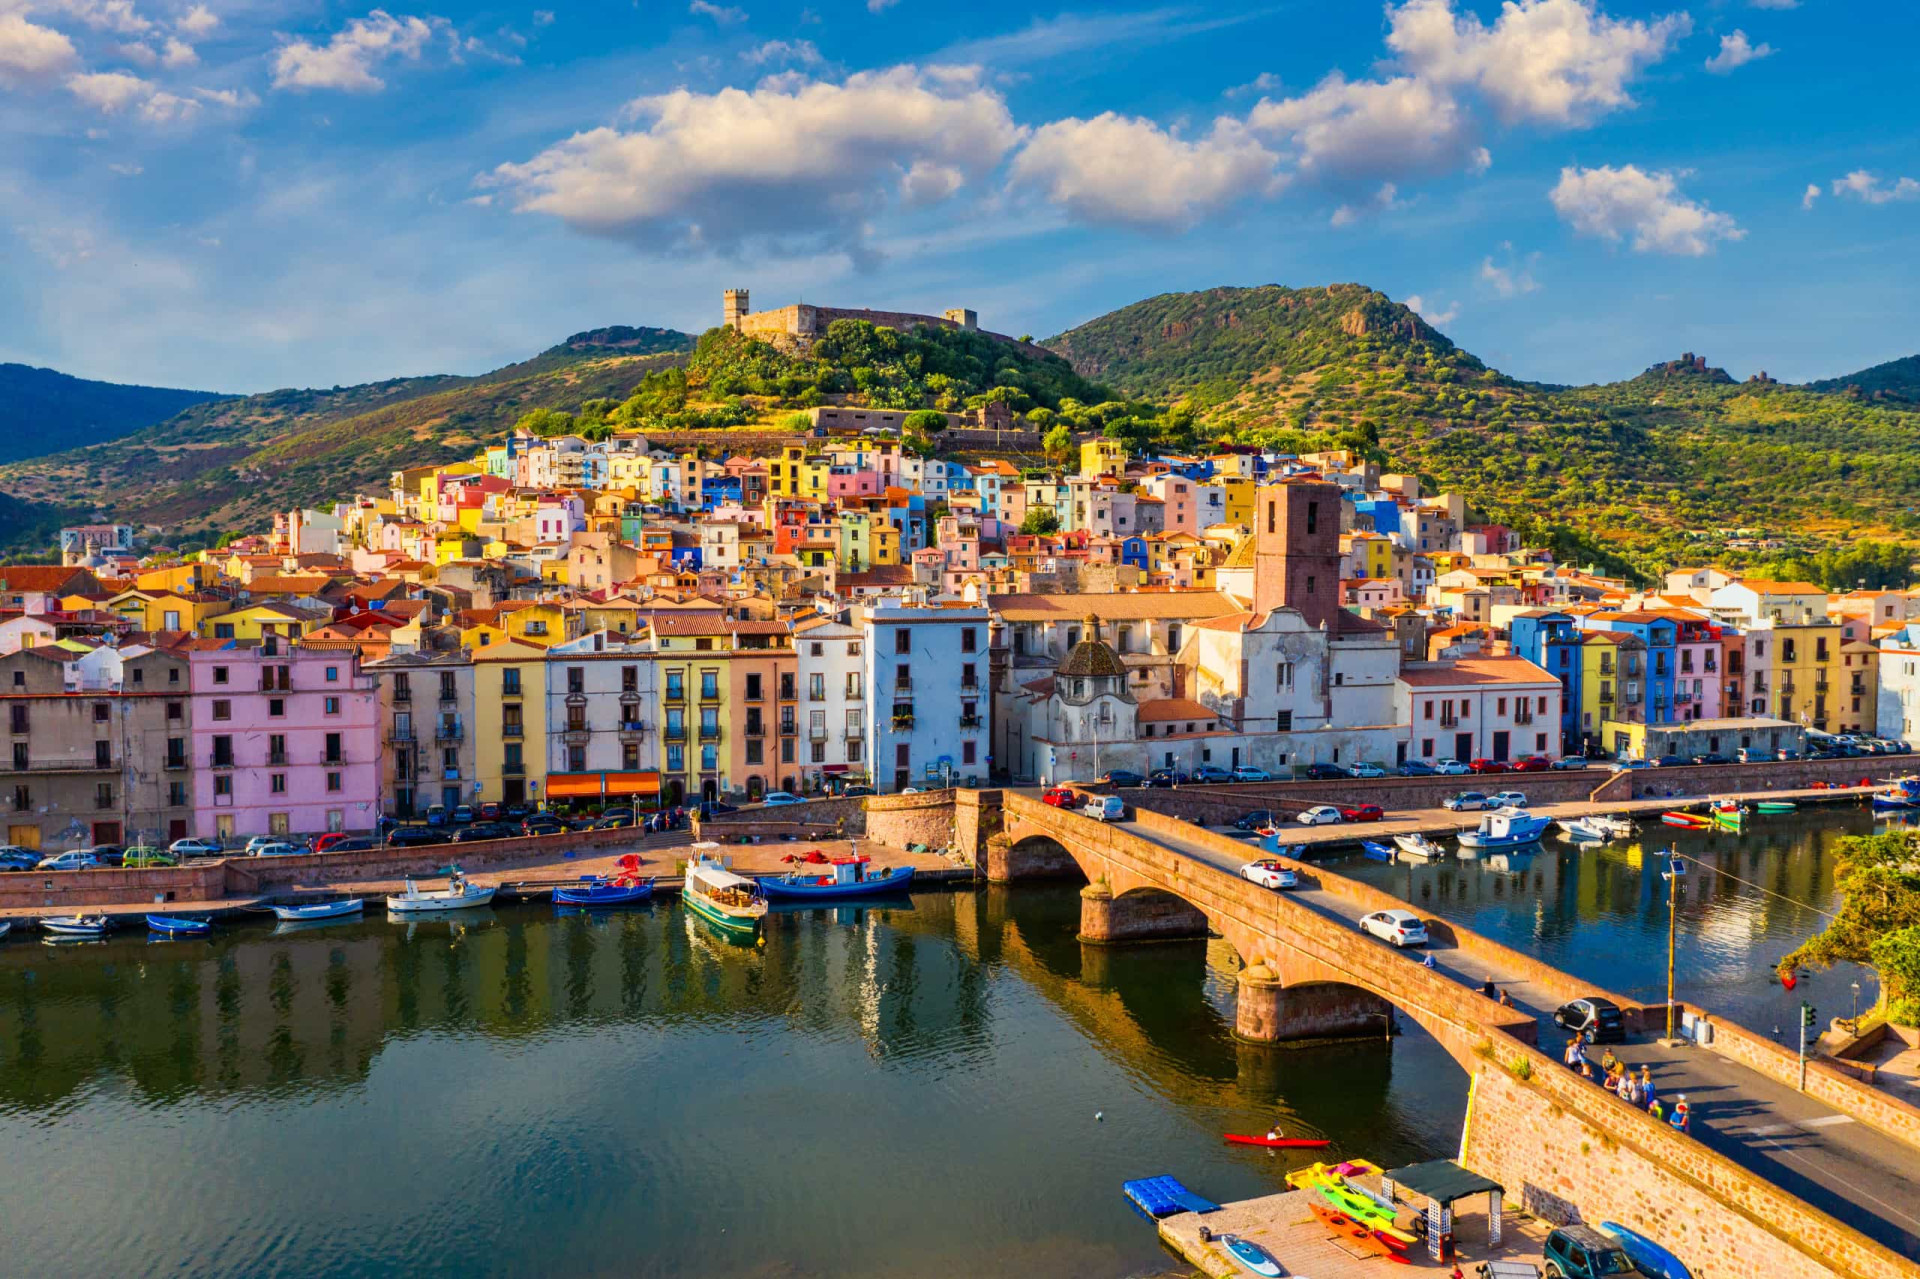 <p>Sardinia has much to offer the visitor, but make sure you explore the small village of Bosa. The colorful old quarter, known as Sa Costa, lies around the medieval Serravalle Castle.</p>